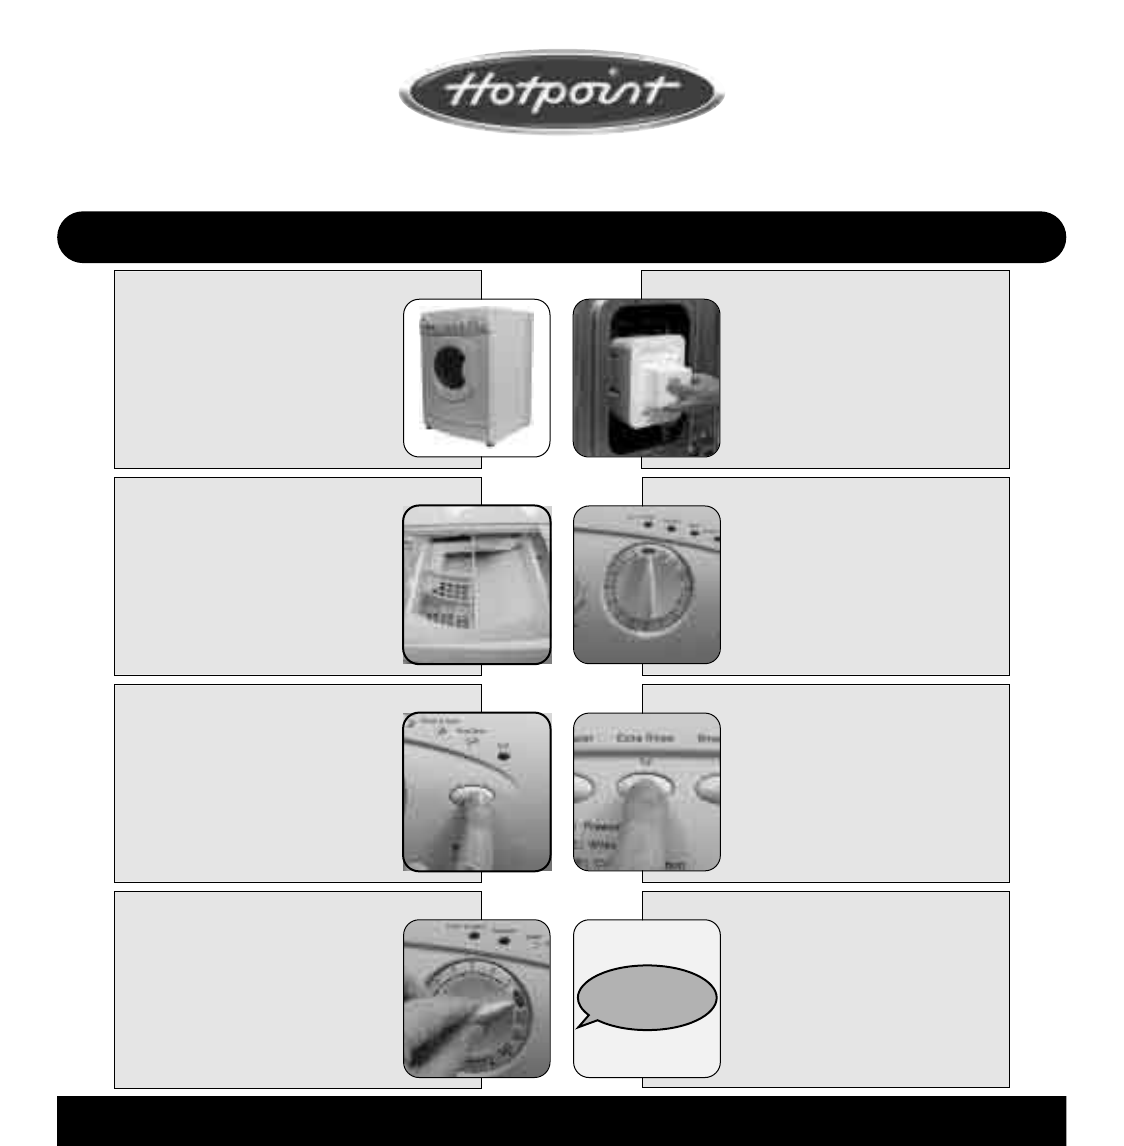 User manual for hotpoint washing machine